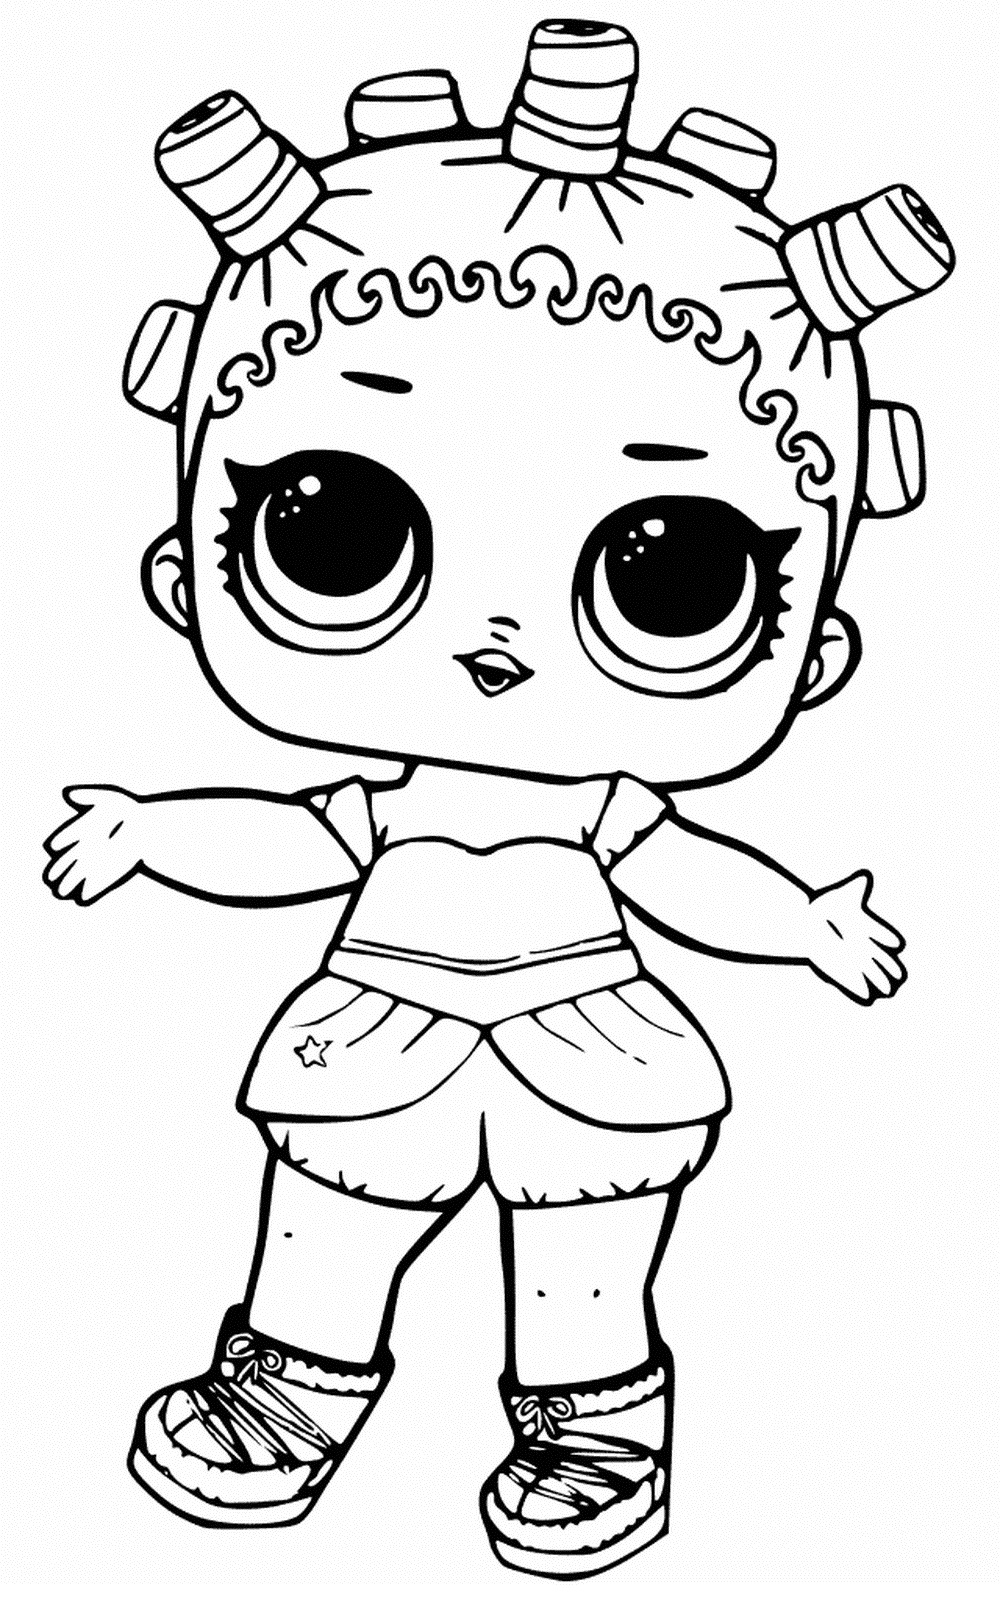 Coloring Pages : Lol Surprise Doll To Color Jungle Book Coloring ...